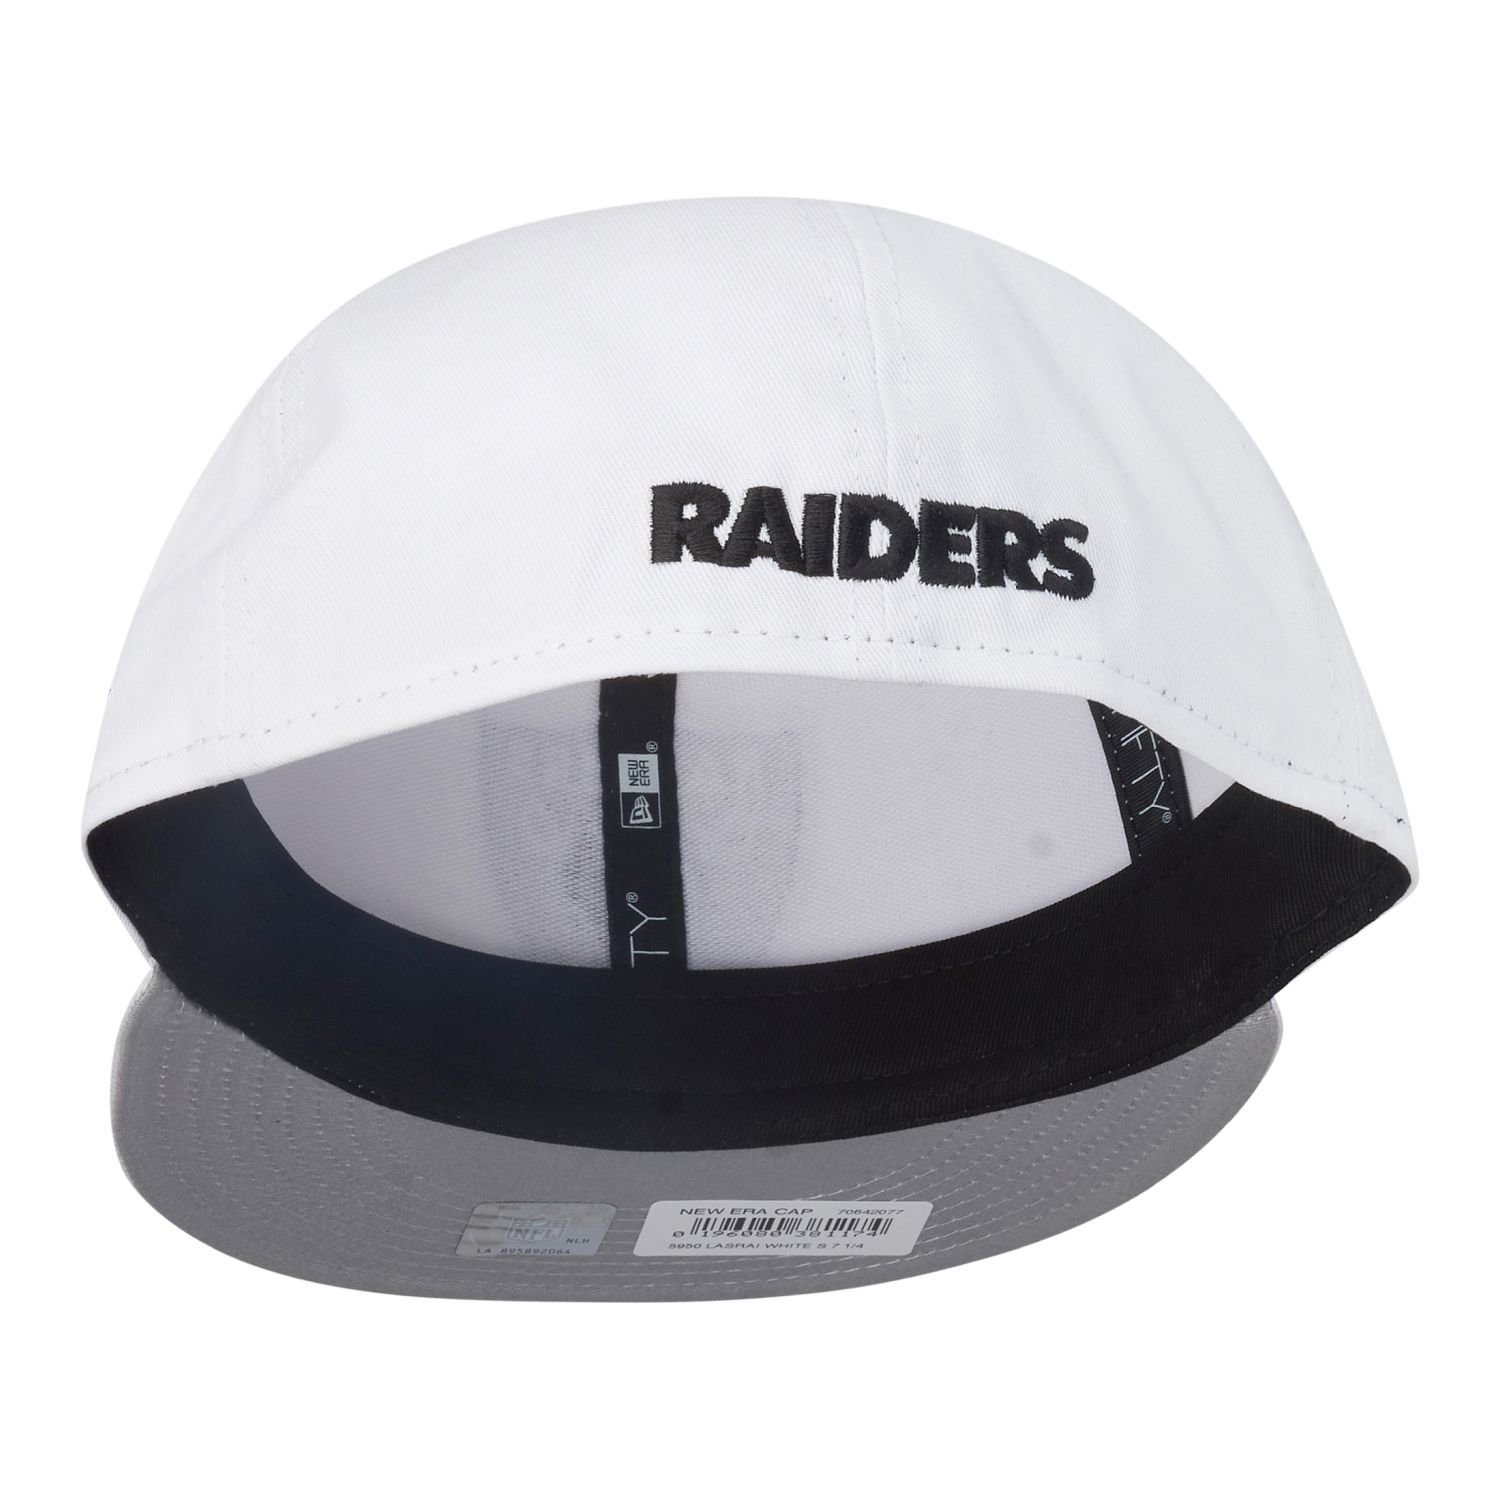 New Las Fitted TWILL Era Vegas Cap SANDED 59Fifty Raiders